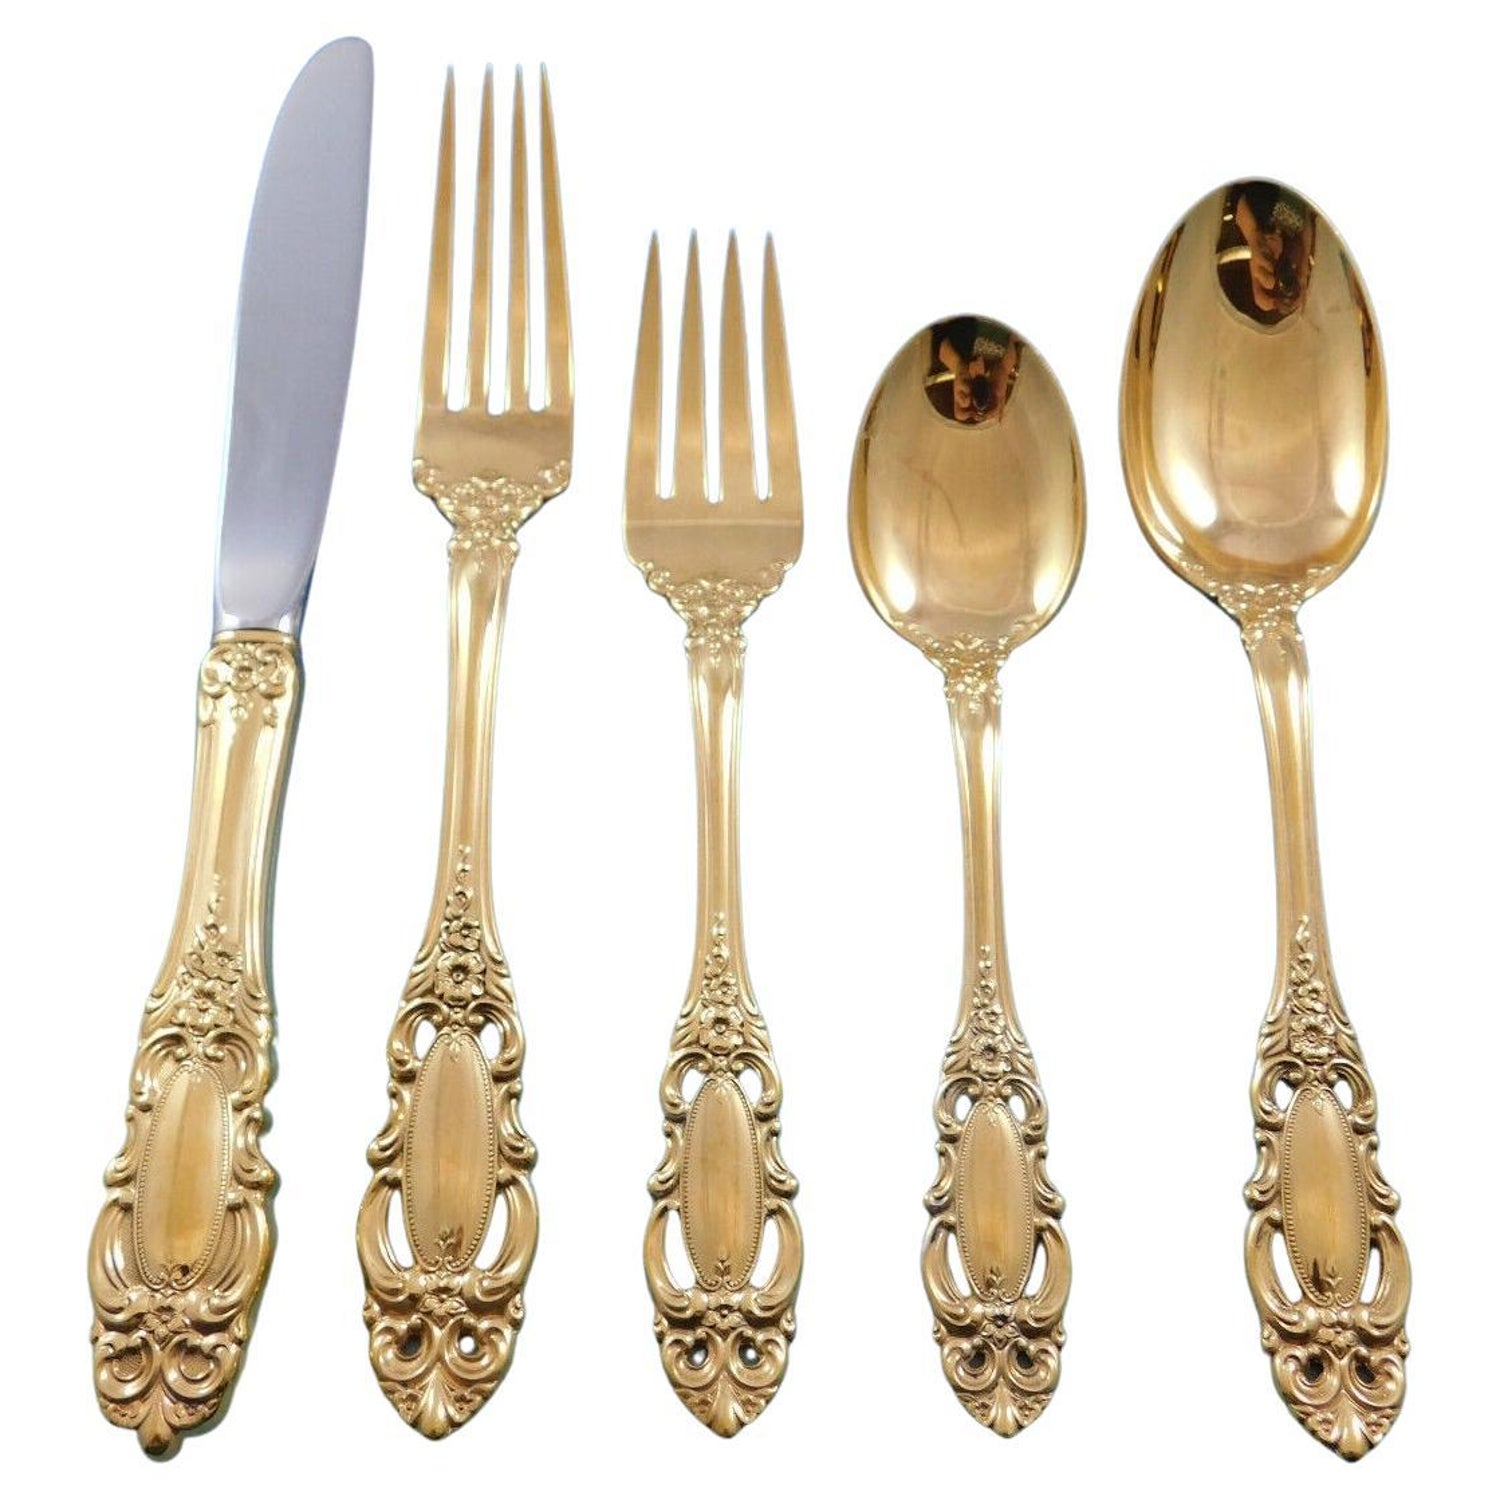 https://a.1stdibscdn.com/grand-duchess-gold-by-towle-sterling-silver-flatware-set-12-service-60-pc-dinner-for-sale/f_10224/f_345214721685453824337/f_34521472_1685453824692_bg_processed.jpg?width=1500